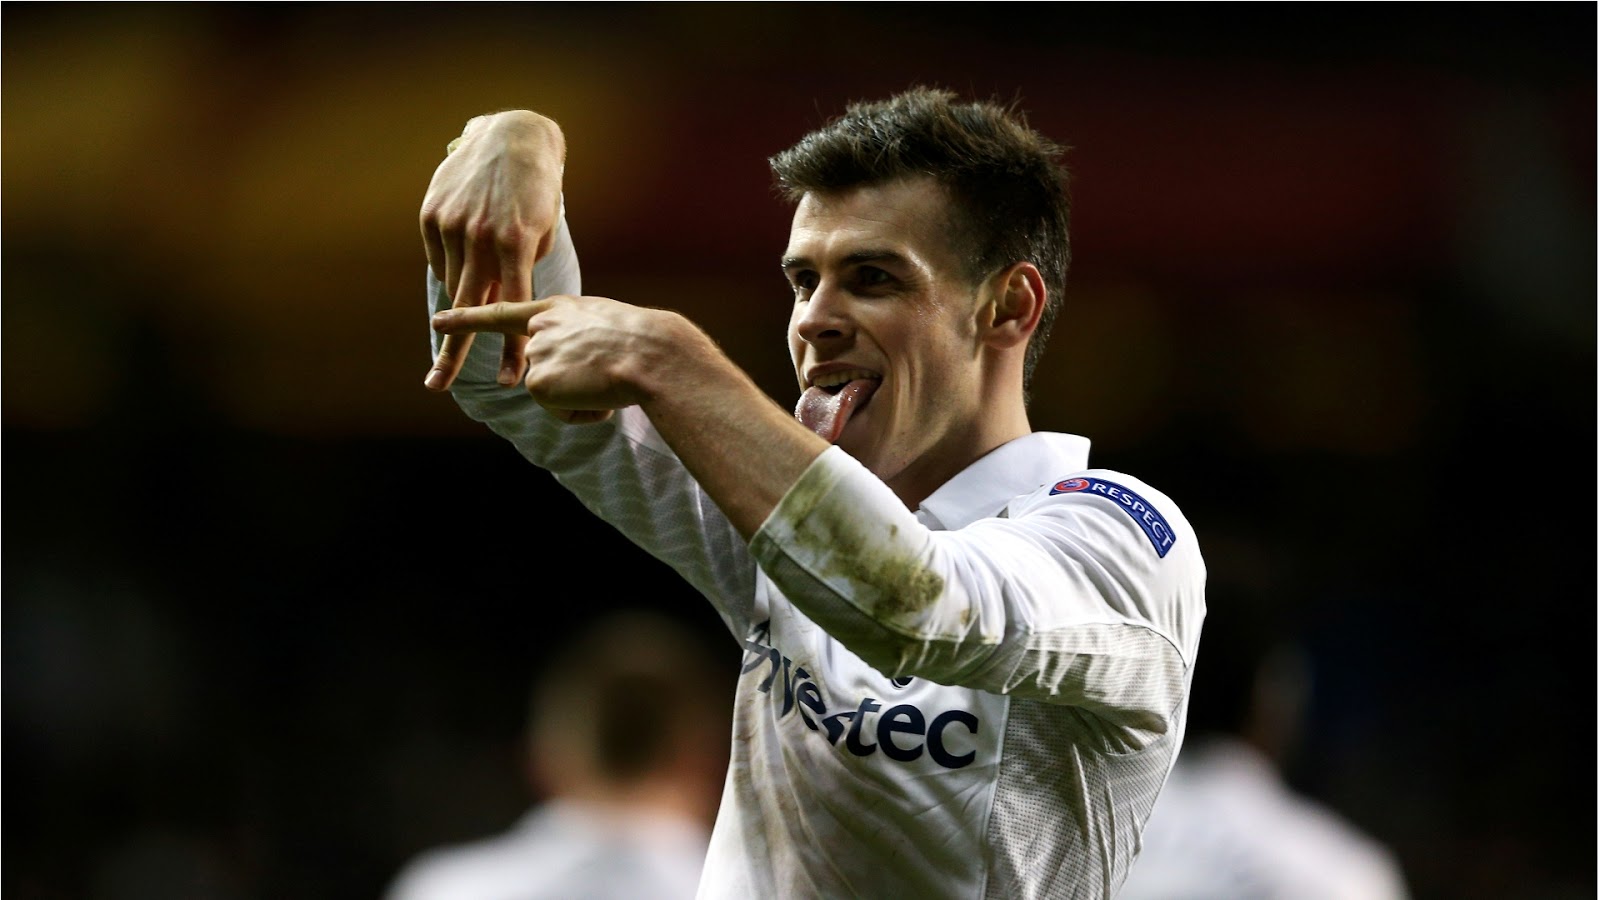 Gareth Bale Fresh Hd Wallpapers 2013 ~ All About HD Wallpapers